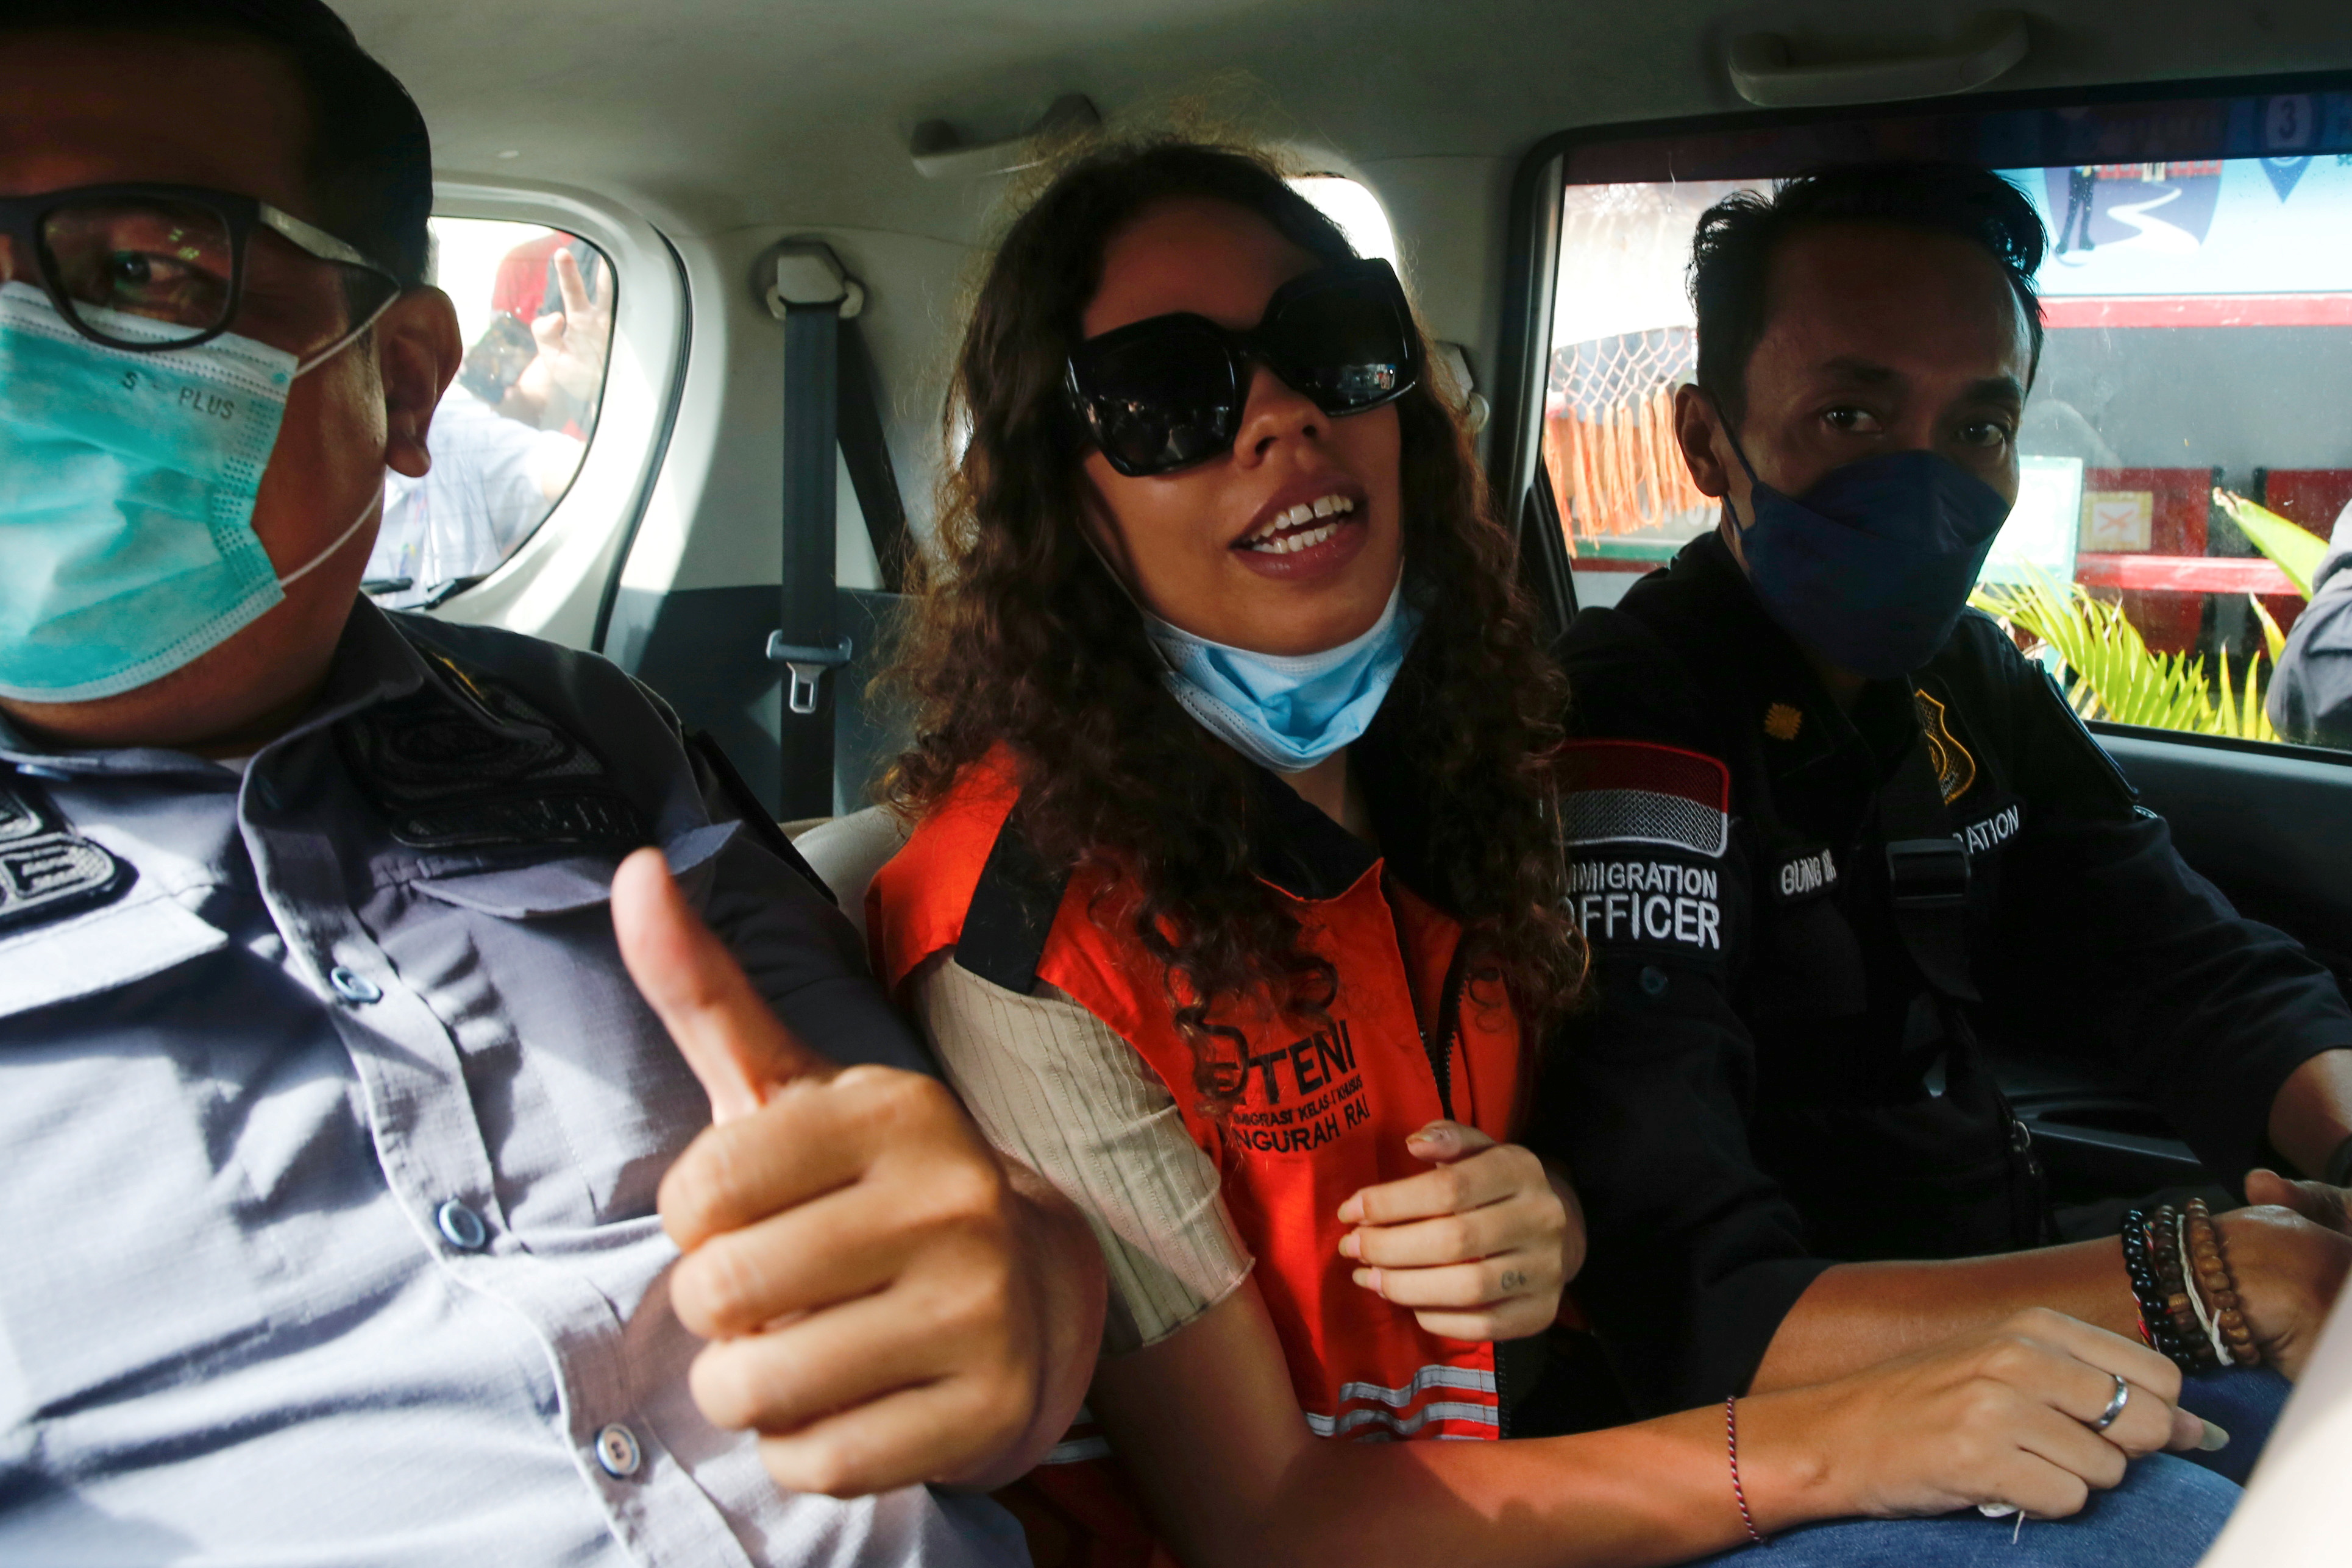 Heather Mack, an American woman jailed in 2015 with her boyfriend after being found guilty for playing a role in murdering her mother, is seen inside an immigration car, after being released from Kerobokan Prison in Denopasar